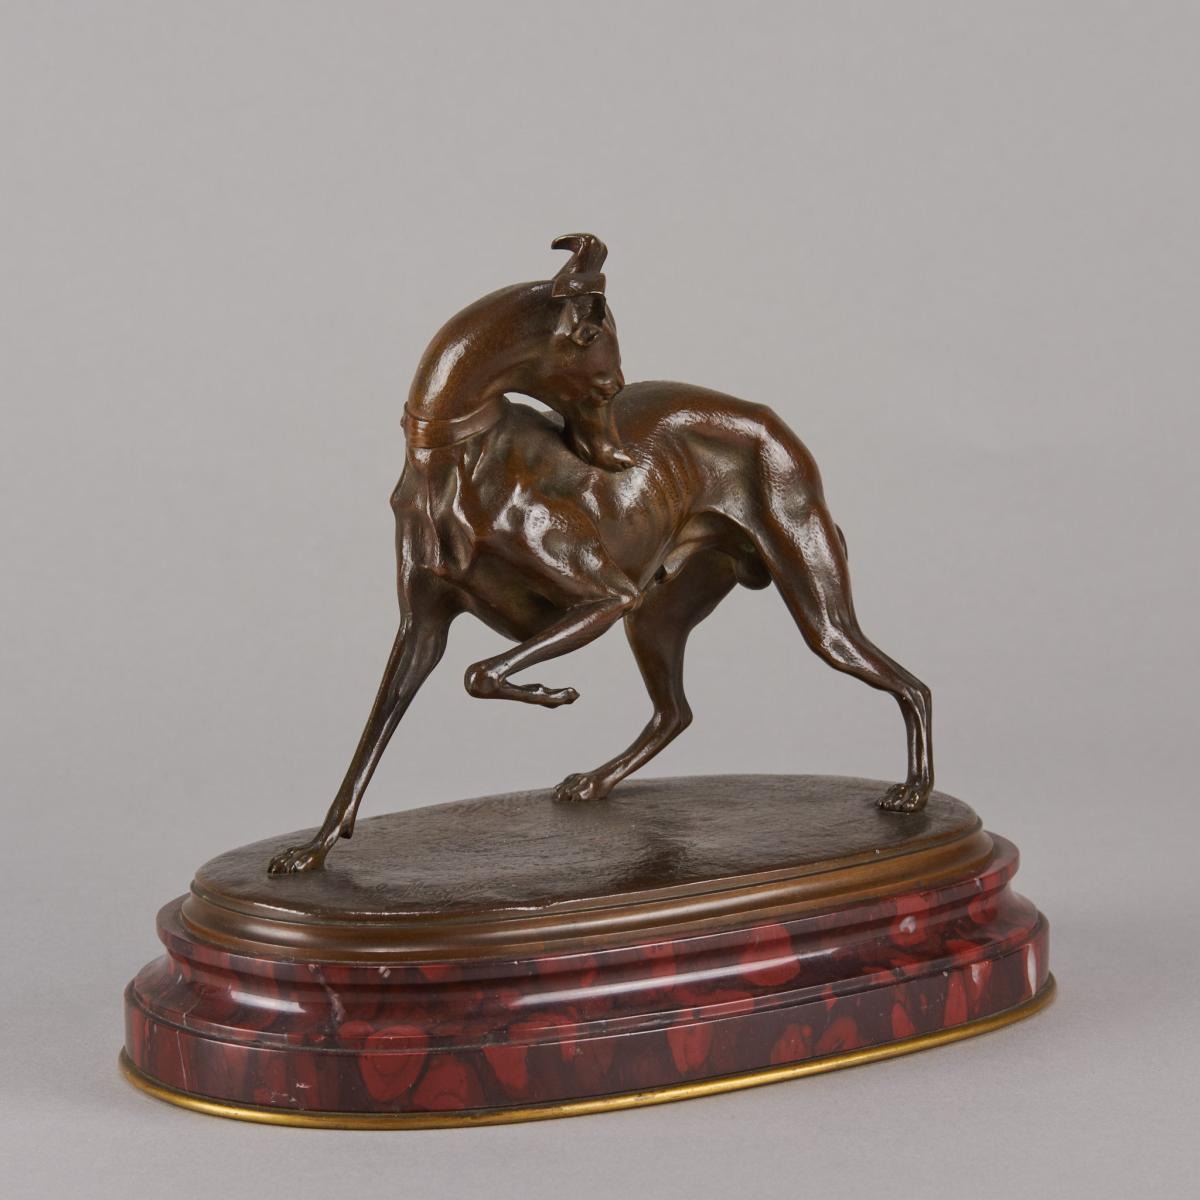 “Whippet Turning’ French Animalier Bronze by L Mayer - circa 1880